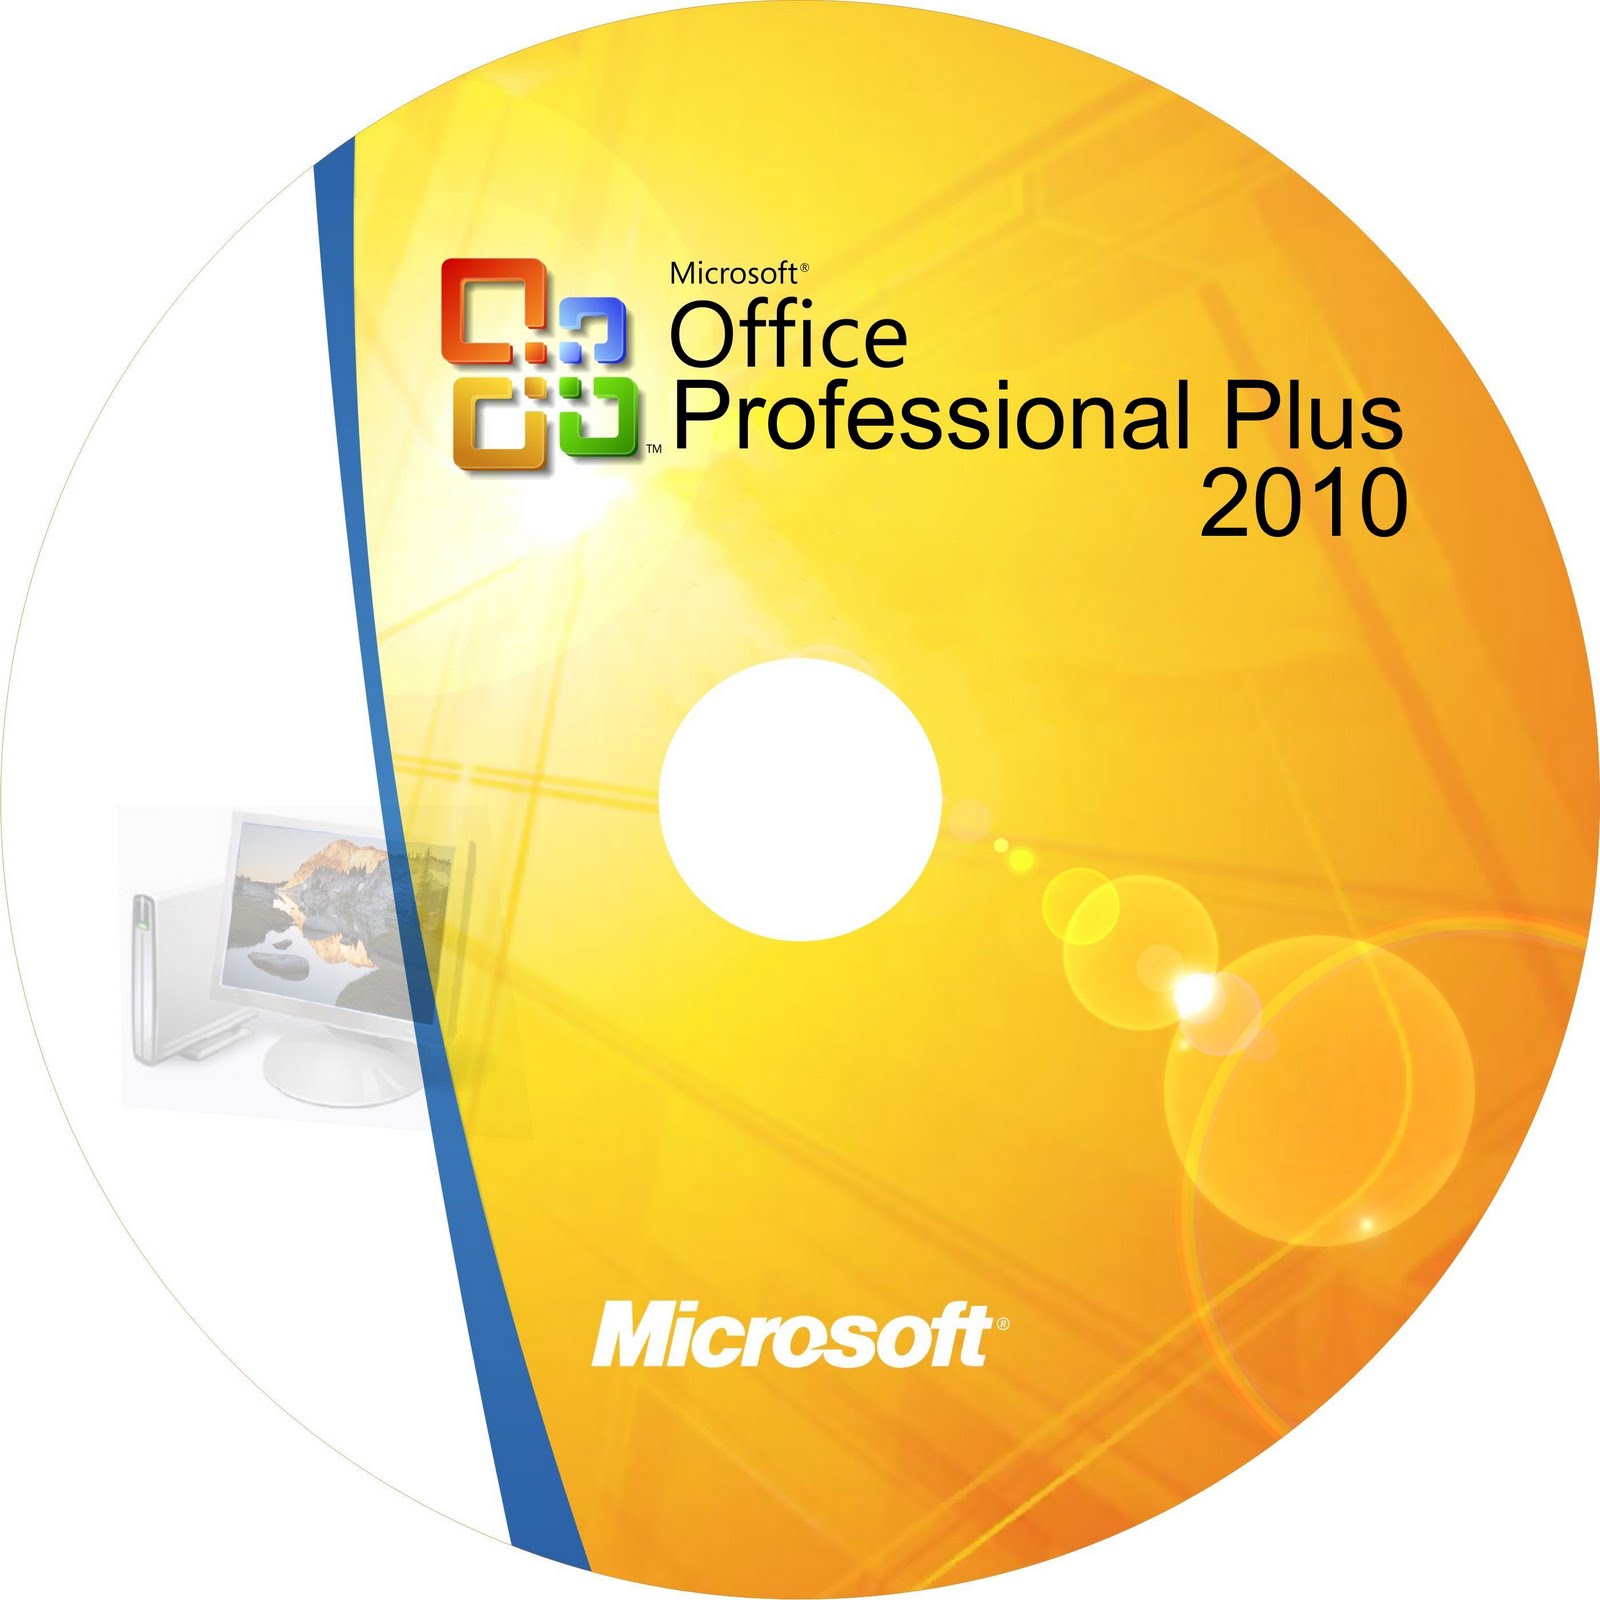 Microsoft Word 2010 Free Download Full Version For Windows Xp